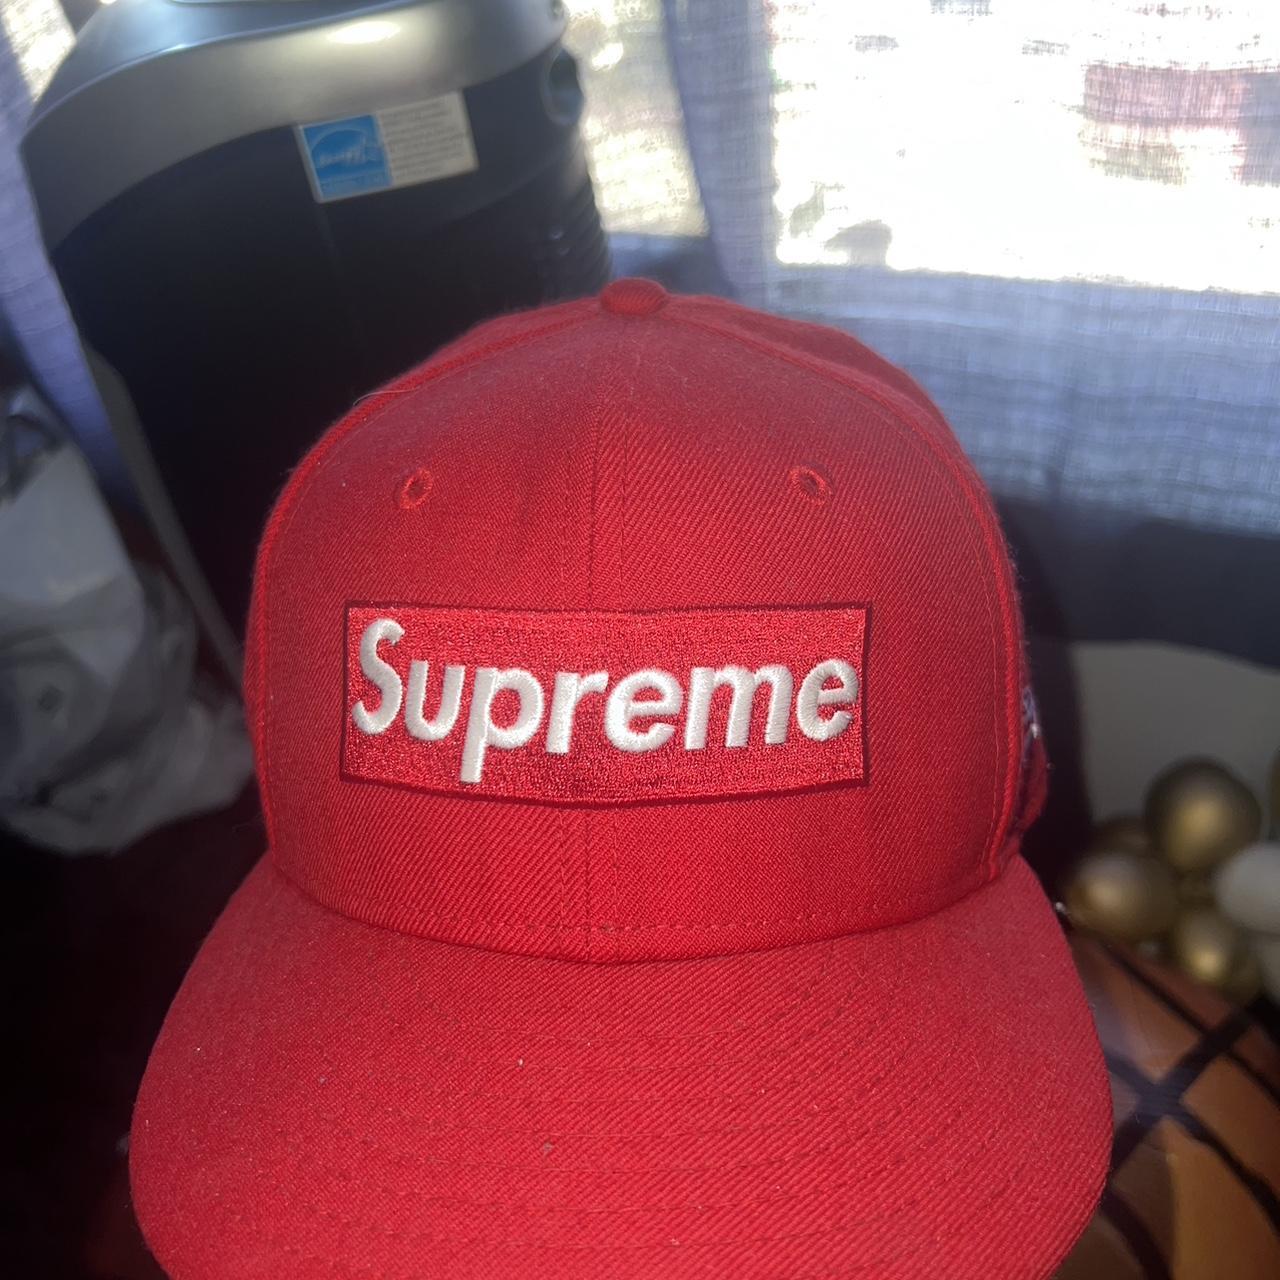 Supreme Men's Red and White Hat | Depop